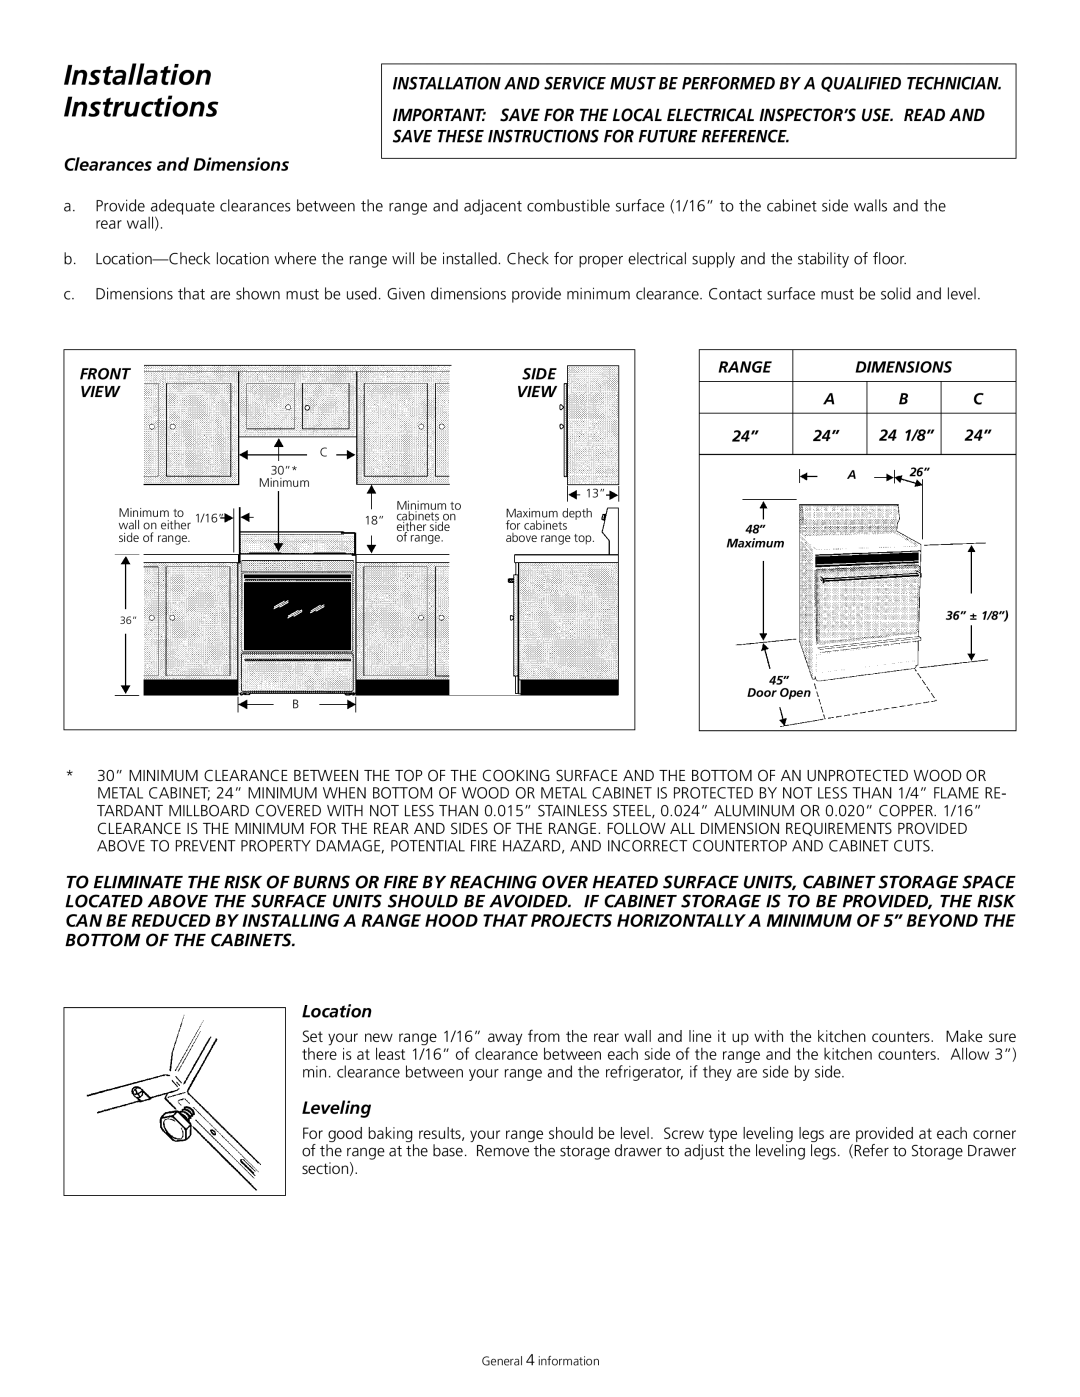 Tappan 318200505 manual Installation Instructions, Clearances and Dimensions, Location, Leveling, Front, Side, Range, View 